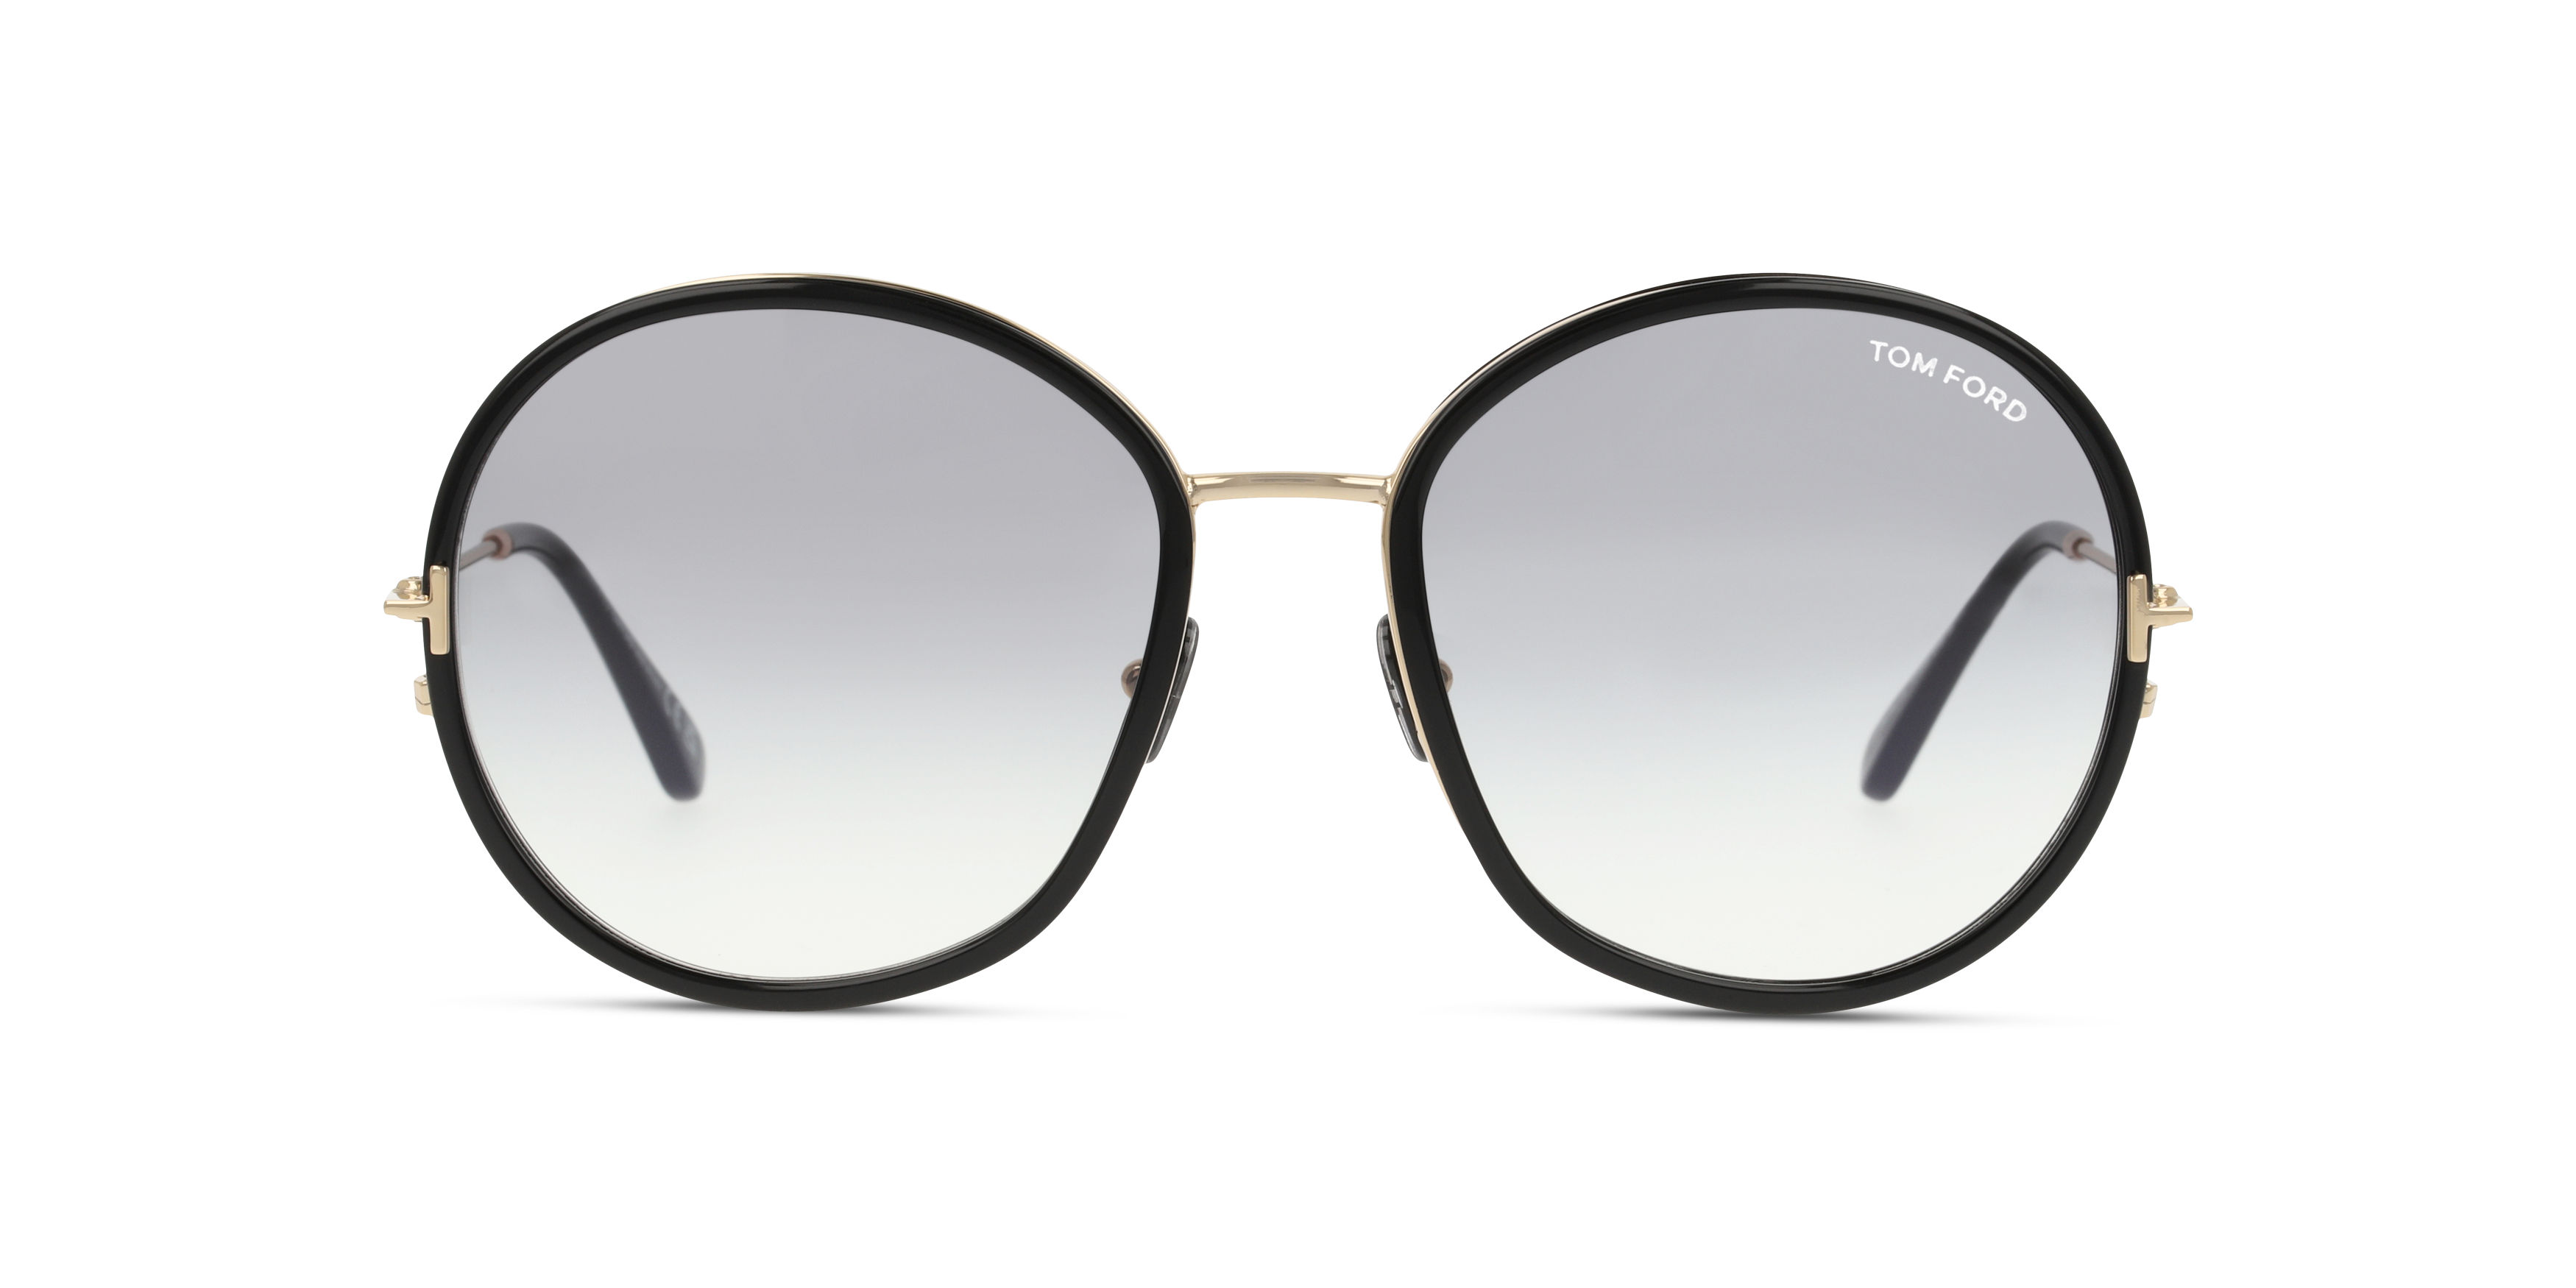 [products.image.front] Tom Ford FT 0946 Sunglasses